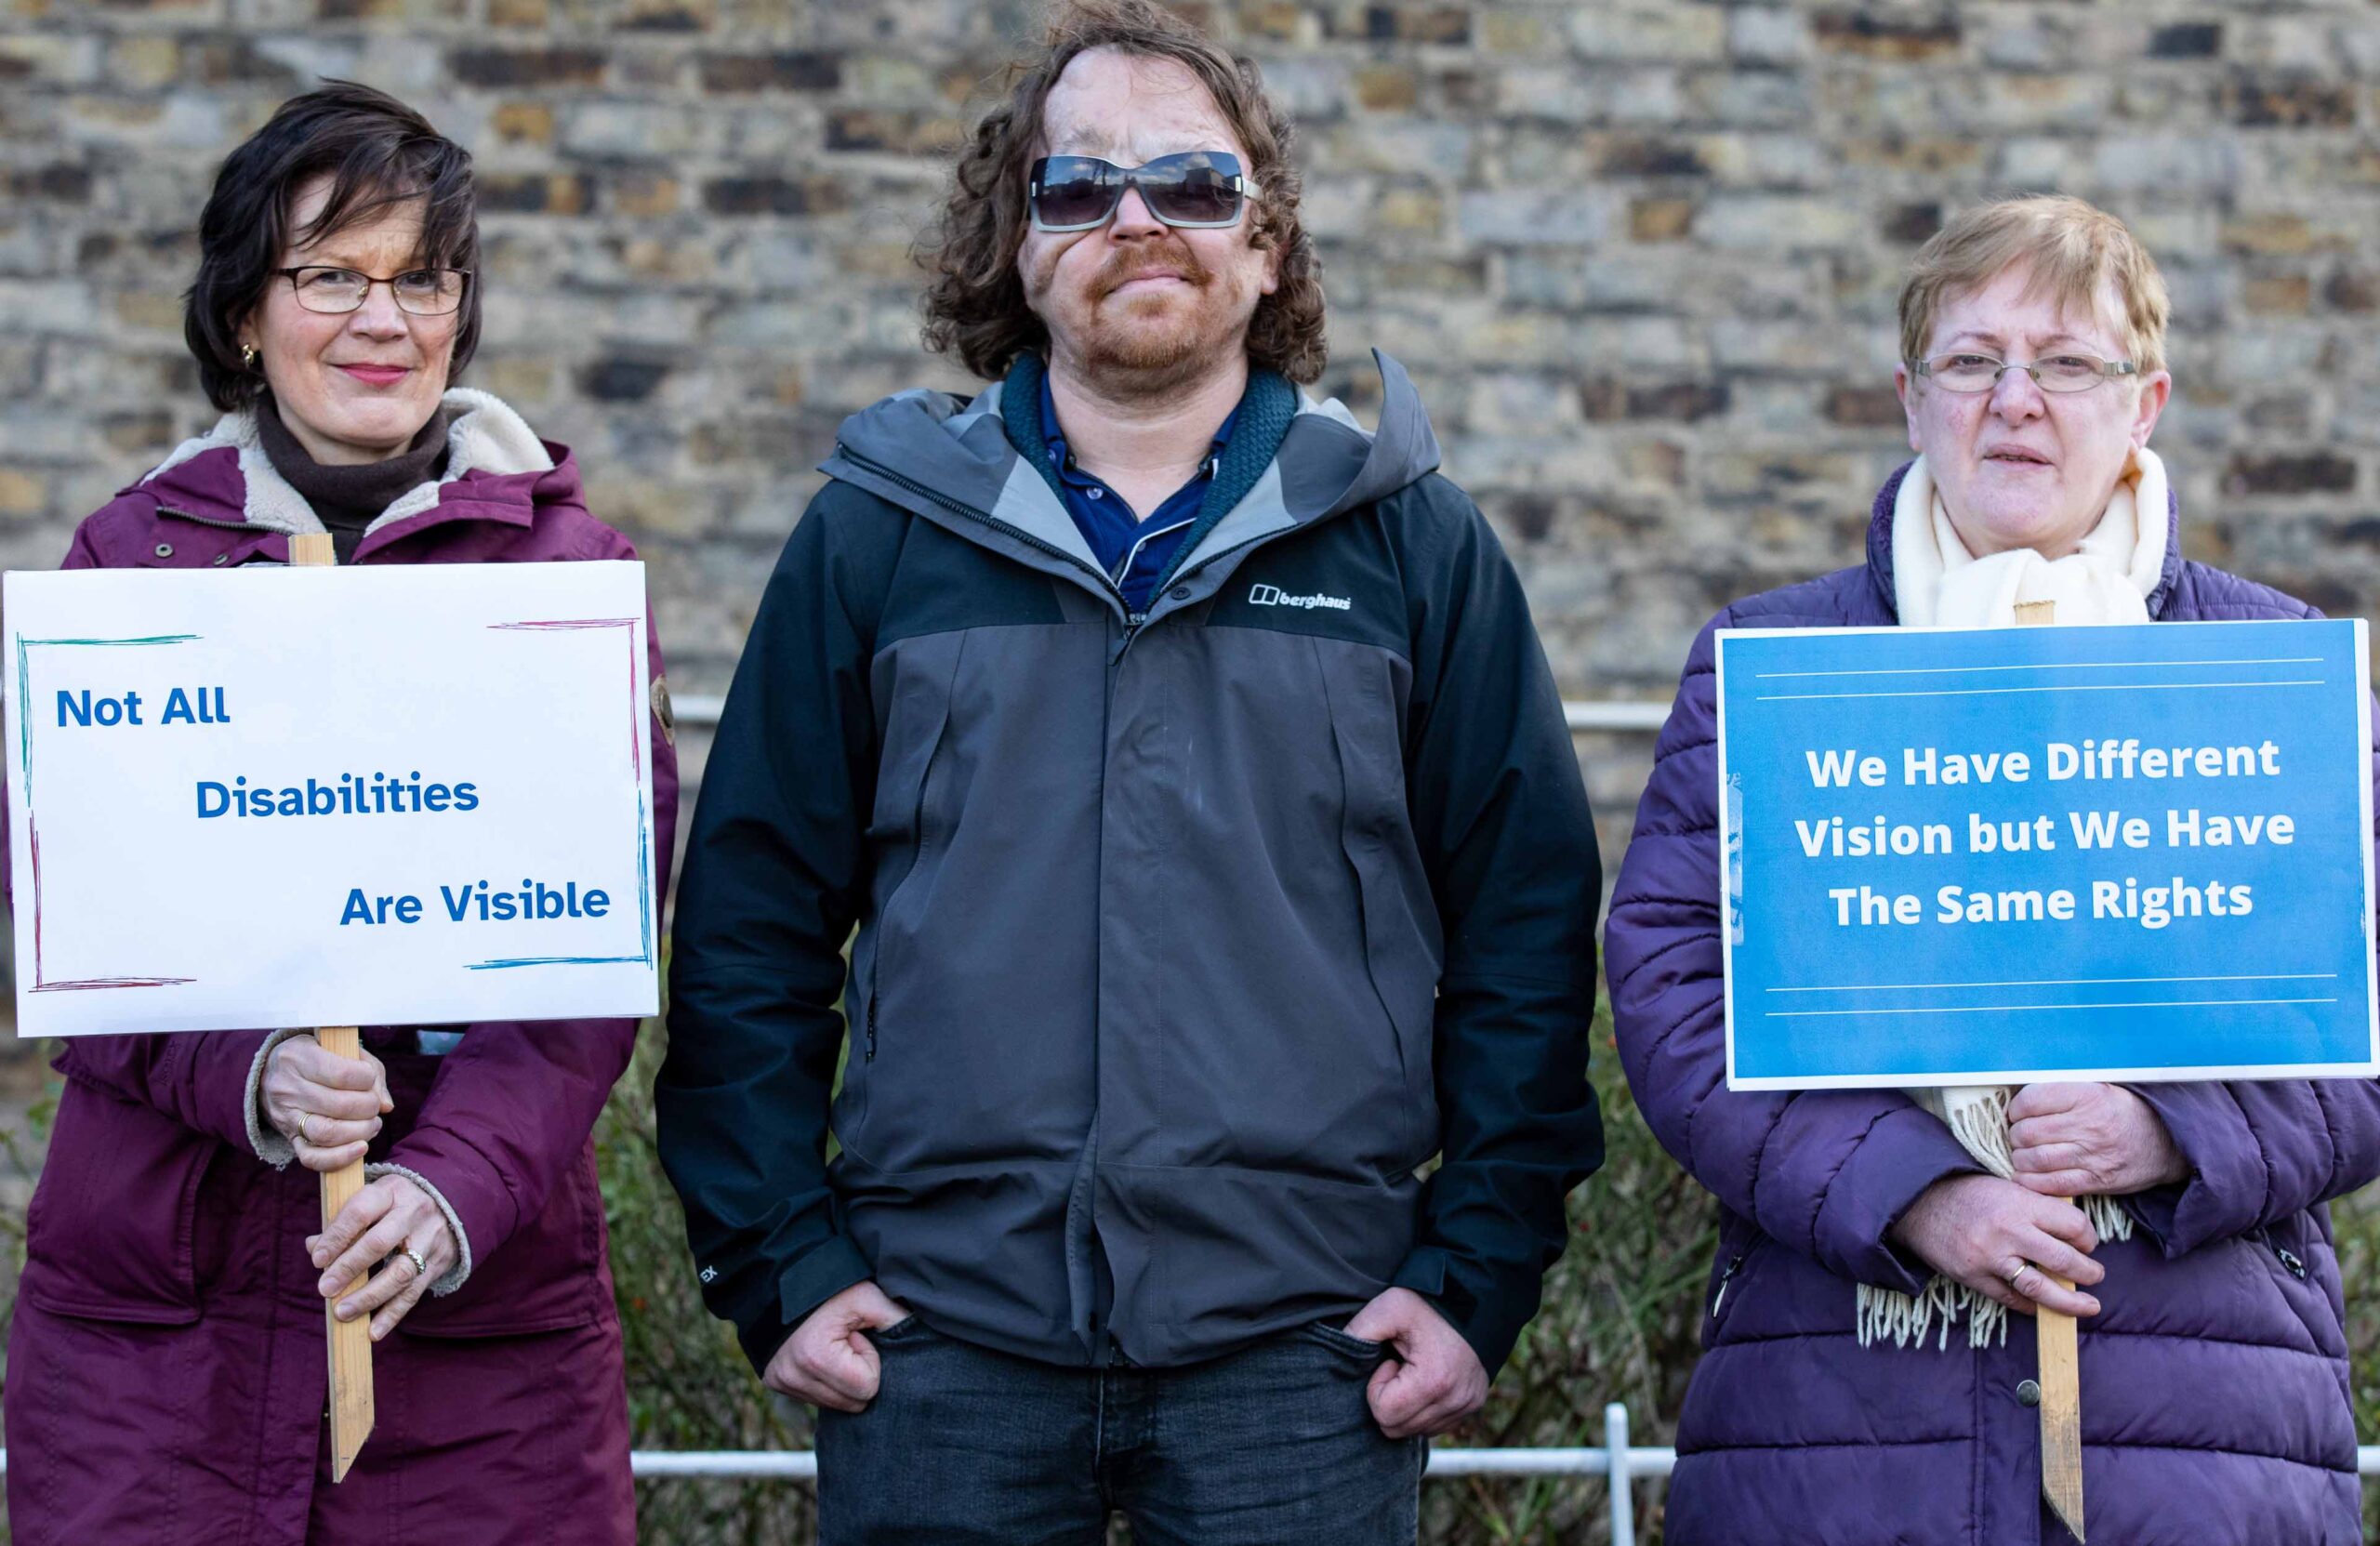 Three Vision Ireland advocates standing together. There is a man in the middle and two women, one either side of him, who are holding signs. The sign on the left reads: Not all disabilities are visible. The sign on the right reads: We have different vision but we have the same rights.